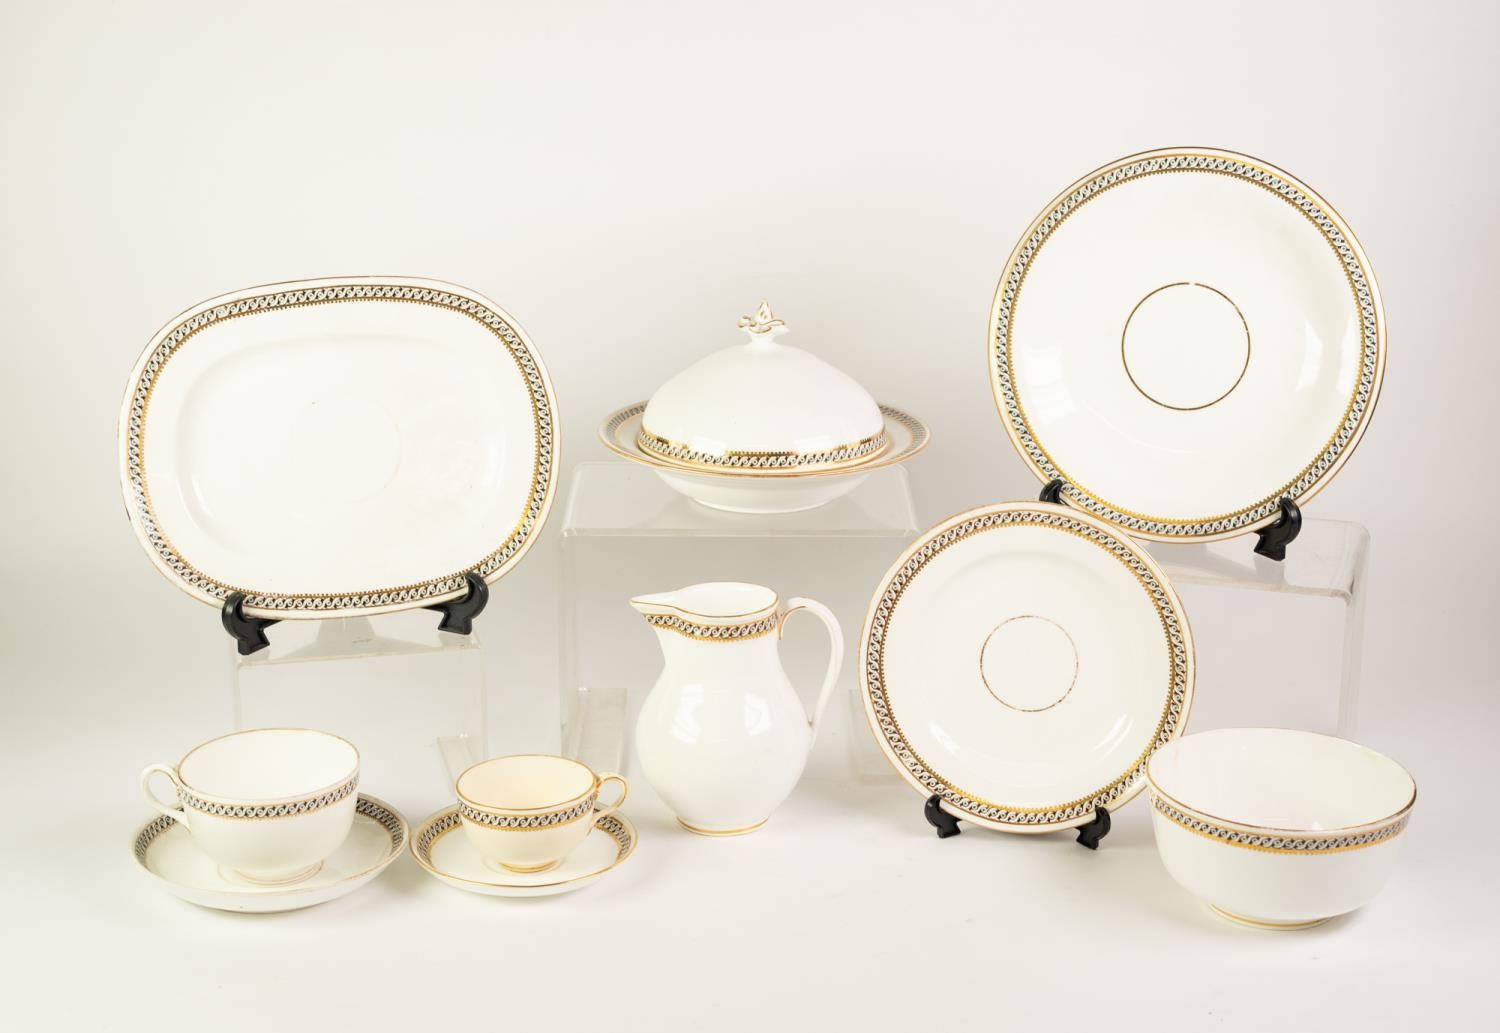 A VICTORIAN 51 PIECE PART BREAKFAST AND TEA SERVICE, COMPRISING; 12 PLATES, 2 BREAD AND BUTTER